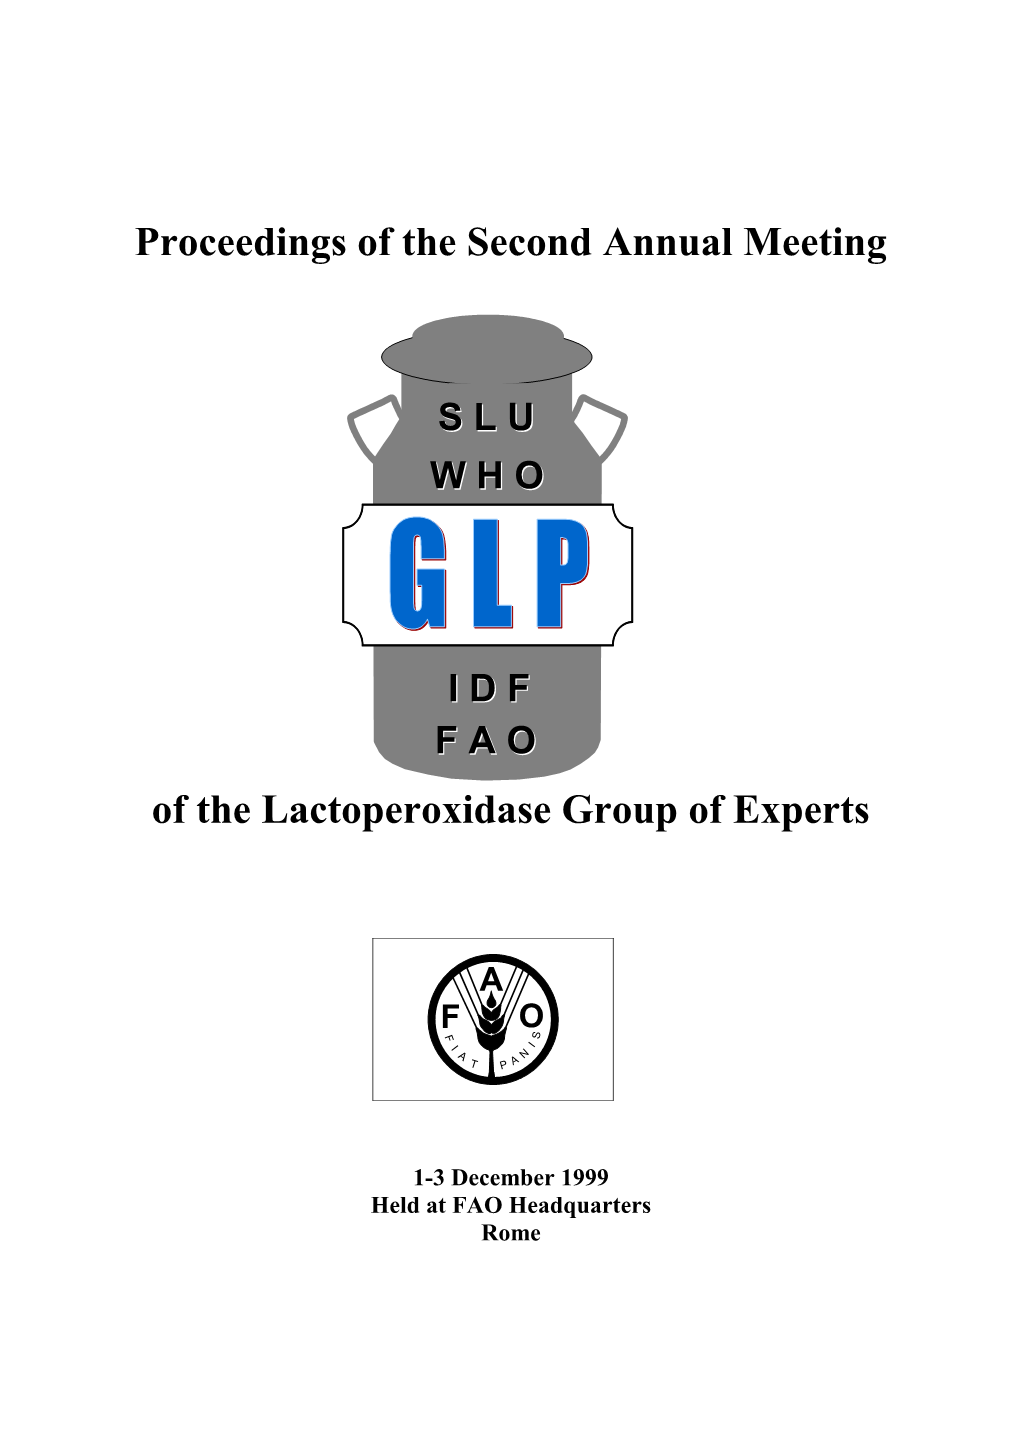 DRAFT Report on the Second Annual Meeting of the Lactoperoxidase Group of Experts